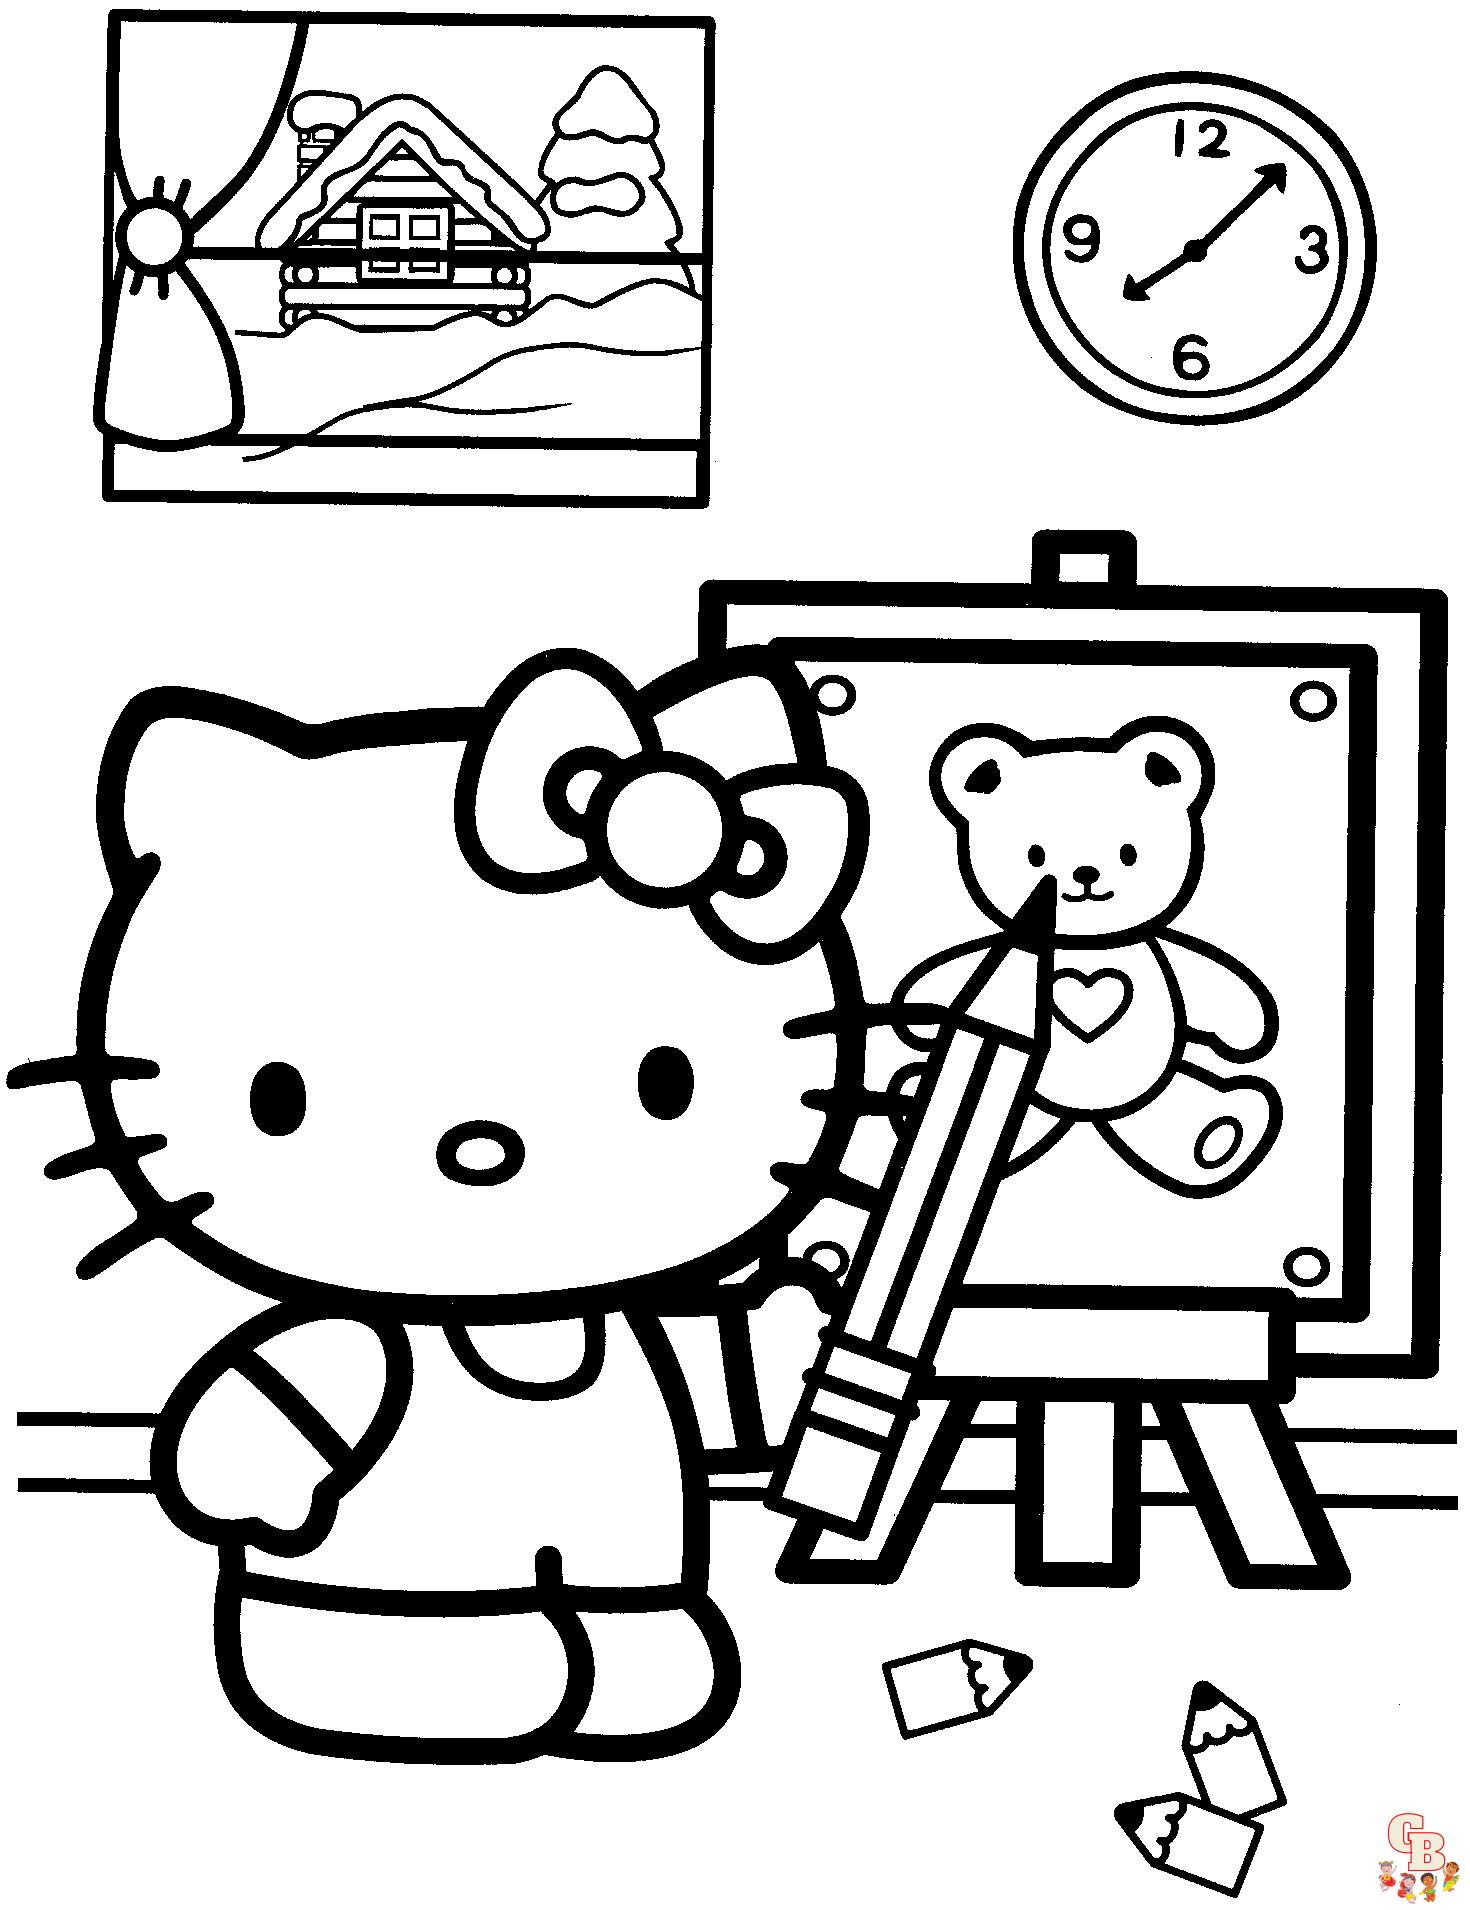 Sanrio Coloring Pages for Students Preschool Pre-K Kinder 1st 5th